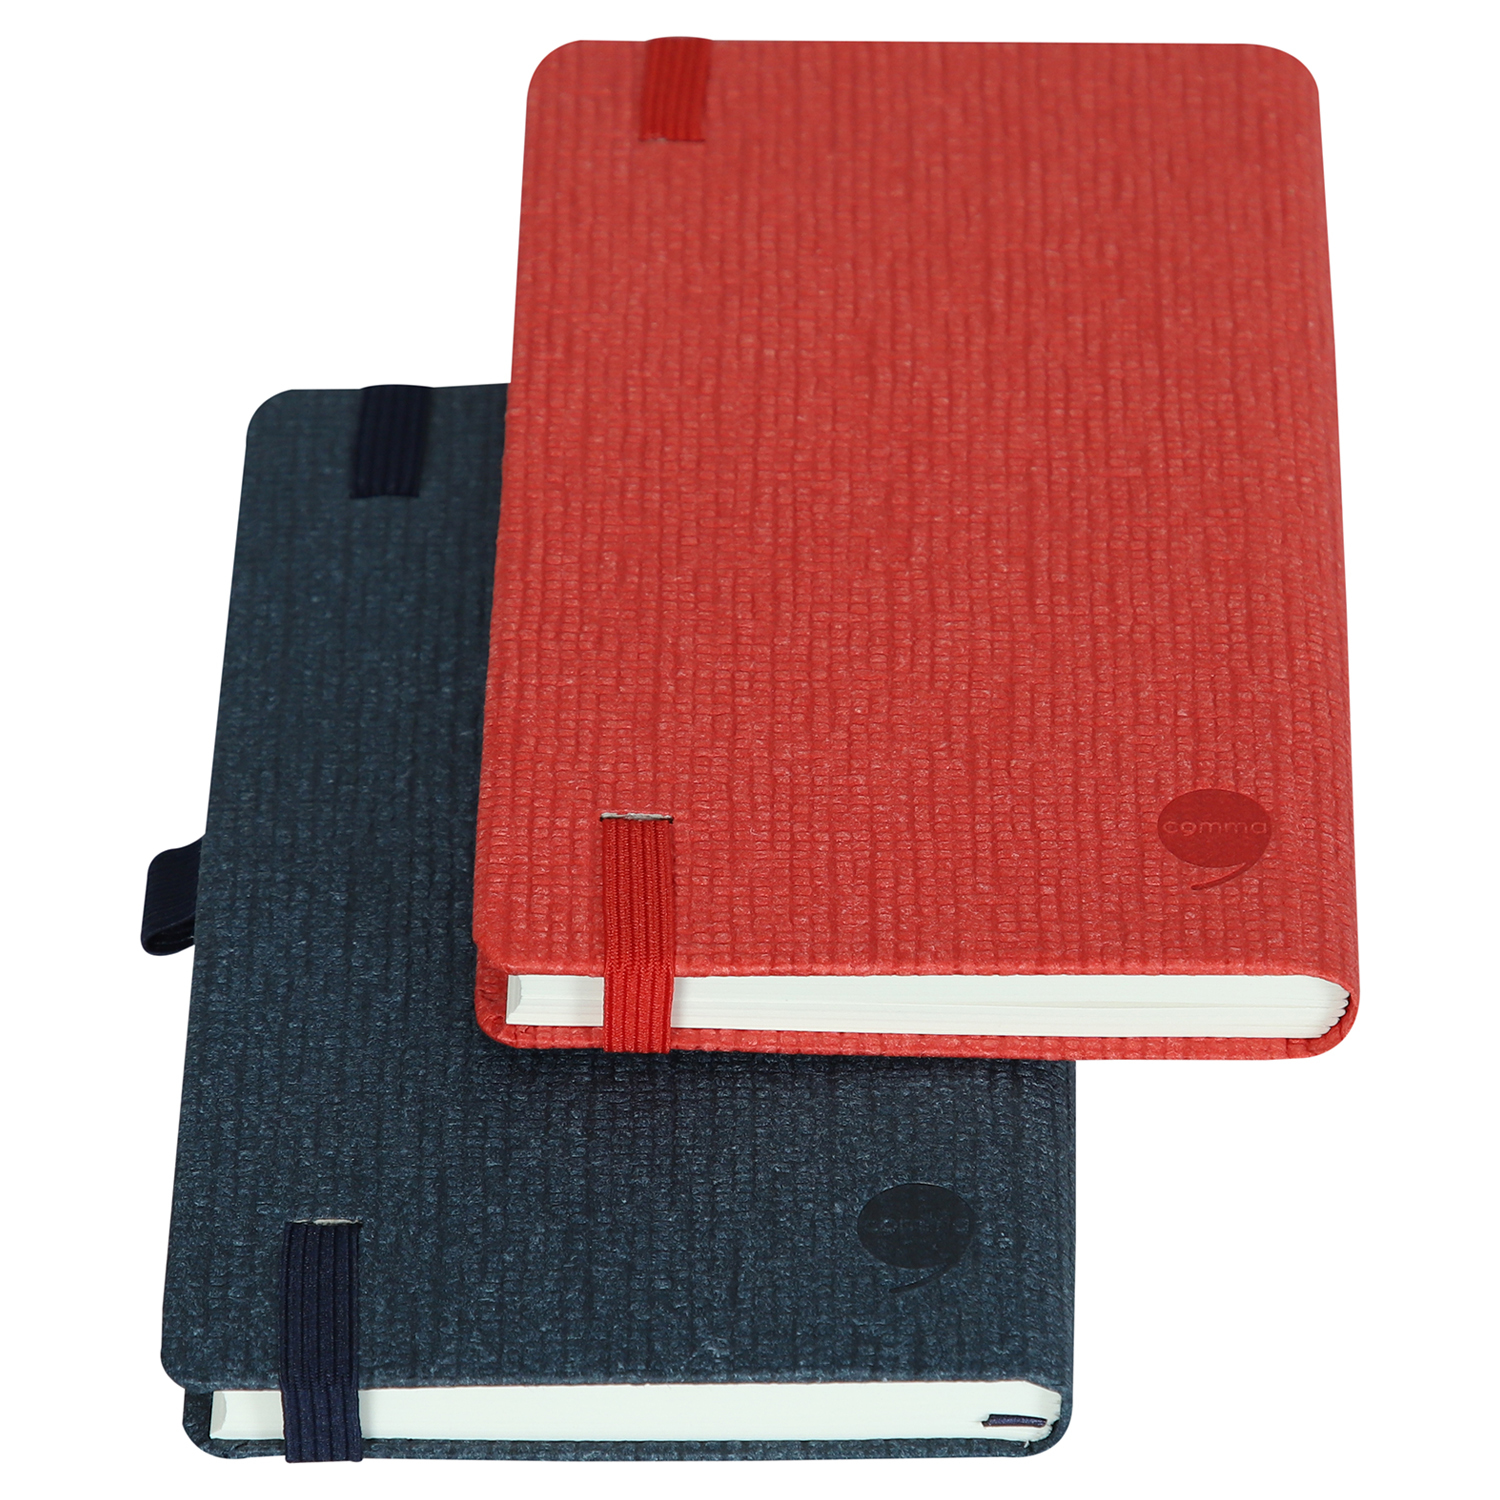 Comma Abaca - A6 Size - Hard Bound Notebook (Navy Blue and Red)